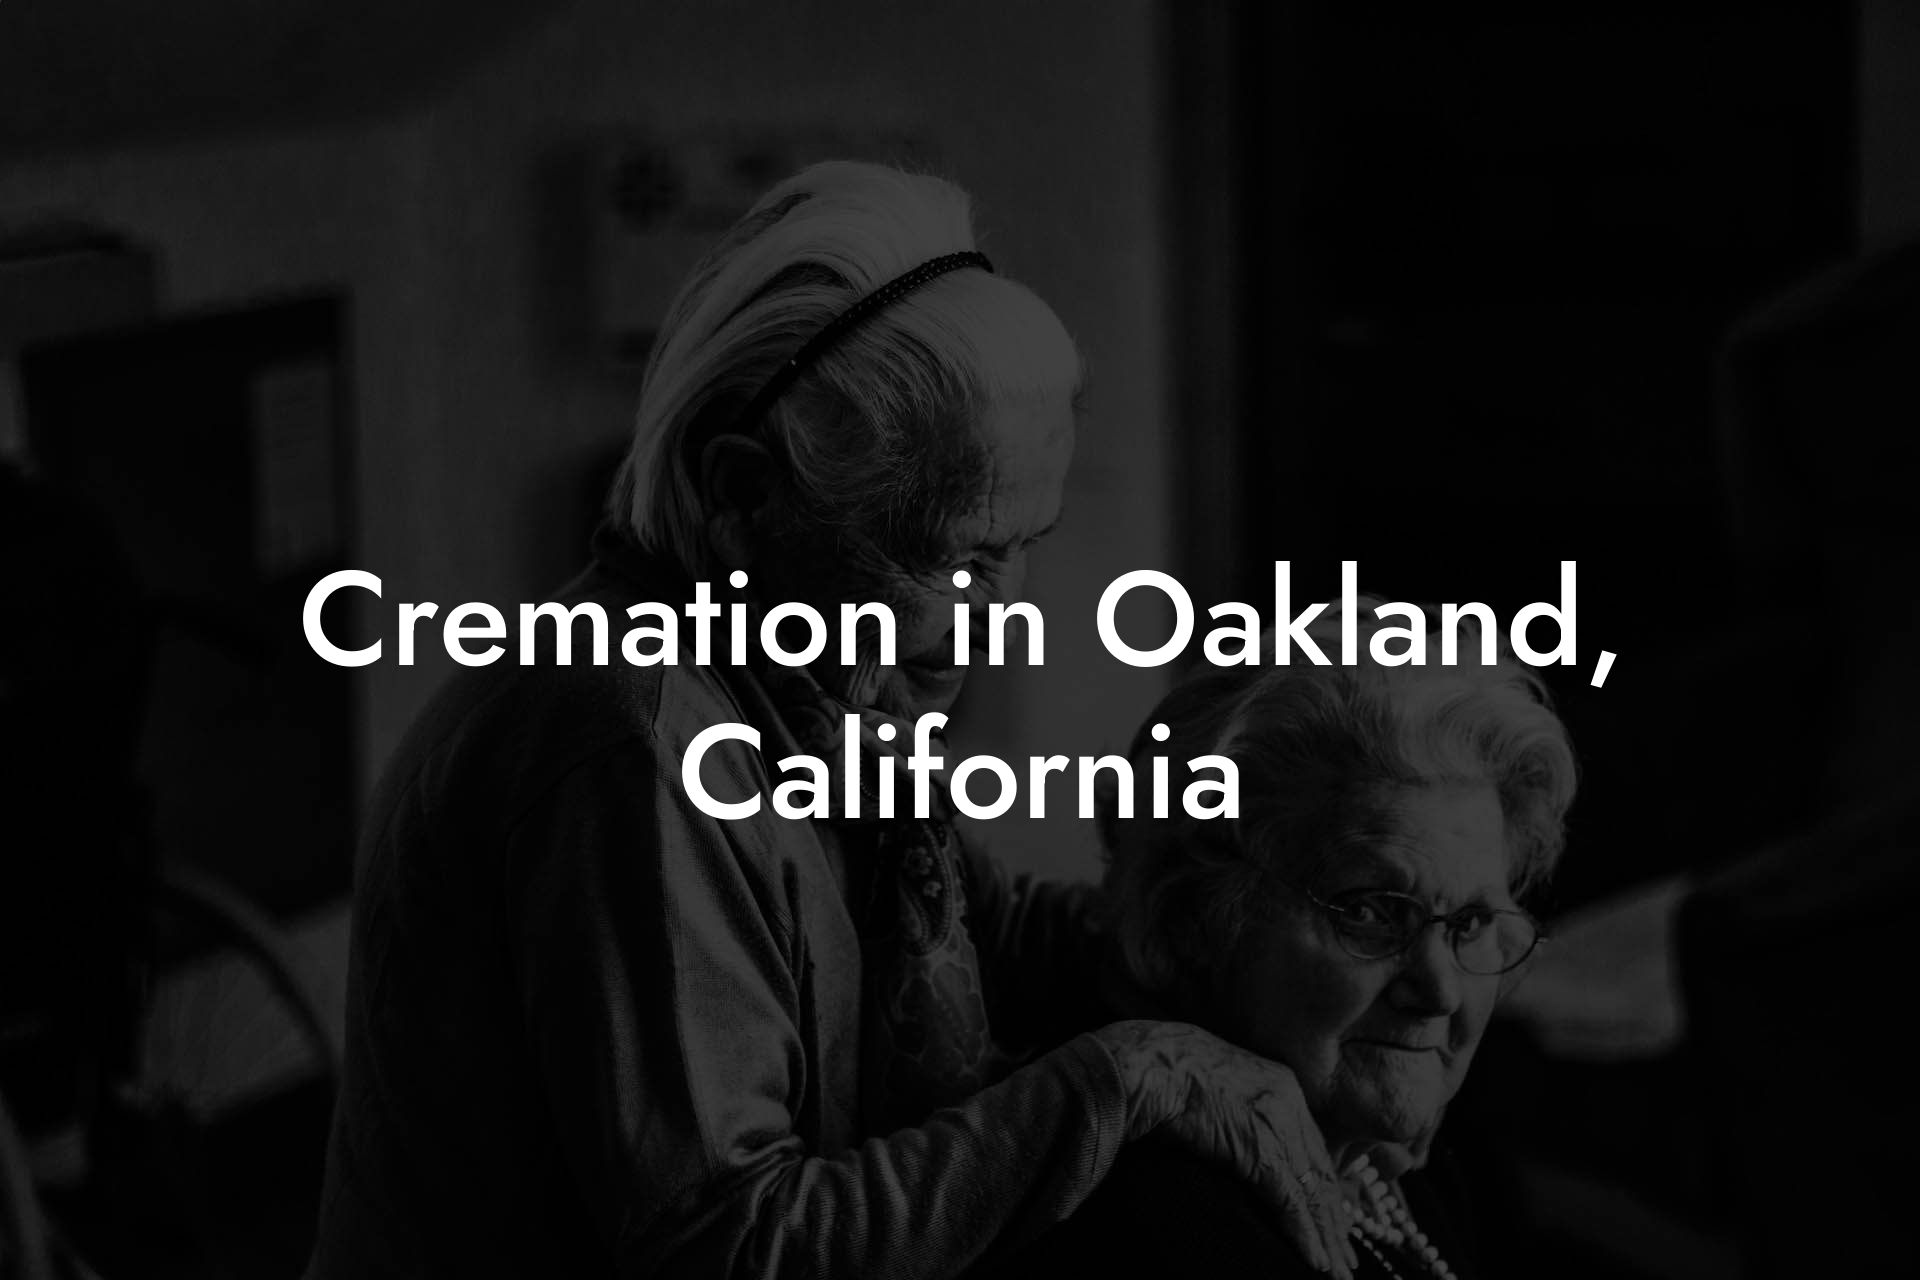 Cremation in Oakland, California